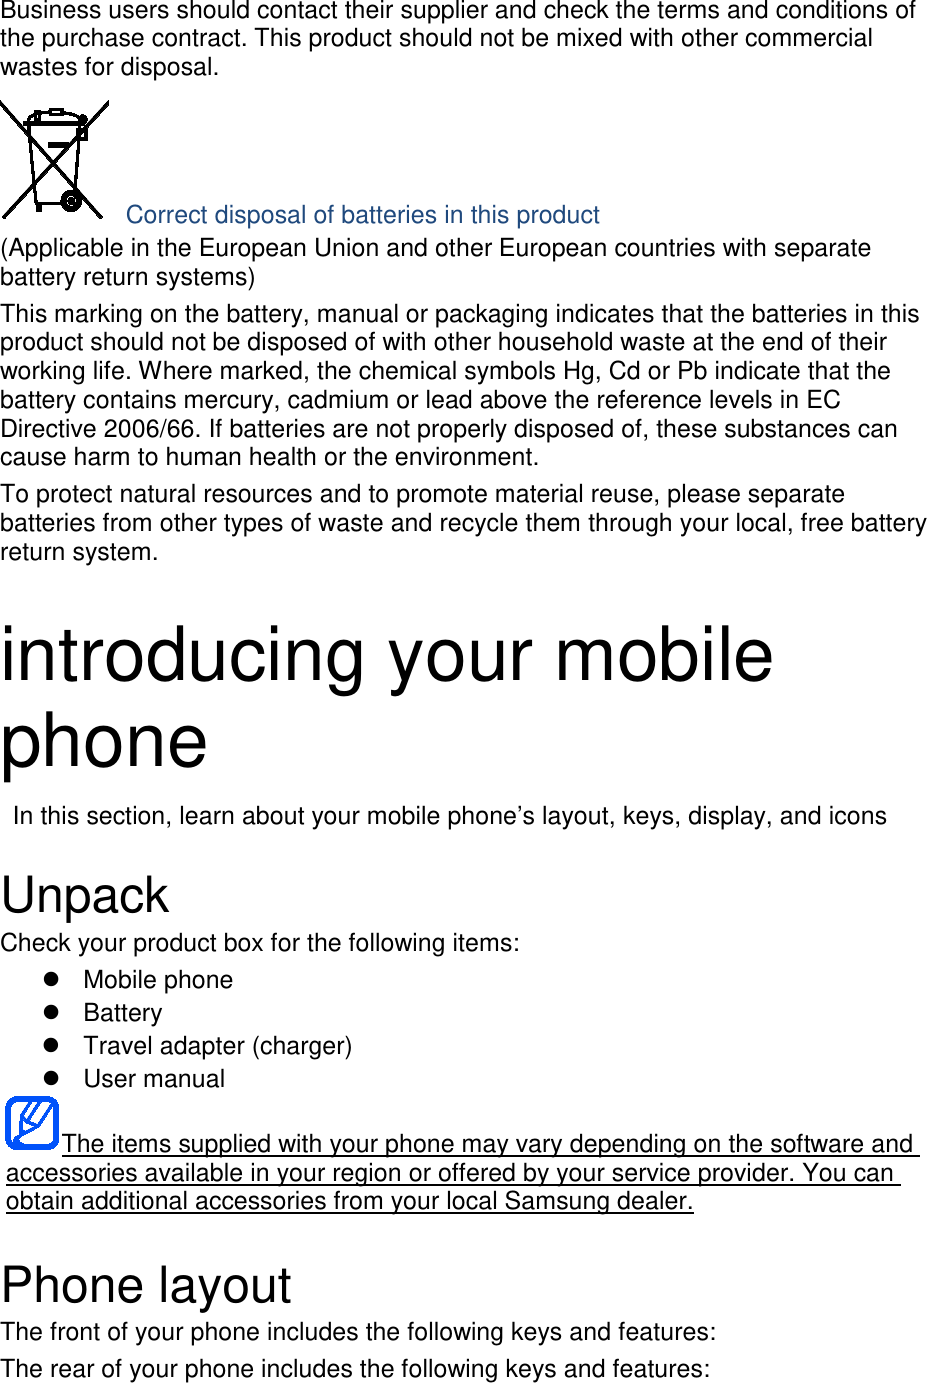 Business users should contact their supplier and check the terms and conditions of the purchase contract. This product should not be mixed with other commercial wastes for disposal.  Correct disposal of batteries in this product (Applicable in the European Union and other European countries with separate battery return systems) This marking on the battery, manual or packaging indicates that the batteries in this product should not be disposed of with other household waste at the end of their working life. Where marked, the chemical symbols Hg, Cd or Pb indicate that the battery contains mercury, cadmium or lead above the reference levels in EC Directive 2006/66. If batteries are not properly disposed of, these substances can cause harm to human health or the environment. To protect natural resources and to promote material reuse, please separate batteries from other types of waste and recycle them through your local, free battery return system.  introducing your mobile phone  In this section, learn about your mobile phone’s layout, keys, display, and icons  Unpack Check your product box for the following items:  Mobile phone  Battery  Travel adapter (charger)  User manual The items supplied with your phone may vary depending on the software and accessories available in your region or offered by your service provider. You can obtain additional accessories from your local Samsung dealer.  Phone layout The front of your phone includes the following keys and features: The rear of your phone includes the following keys and features: 